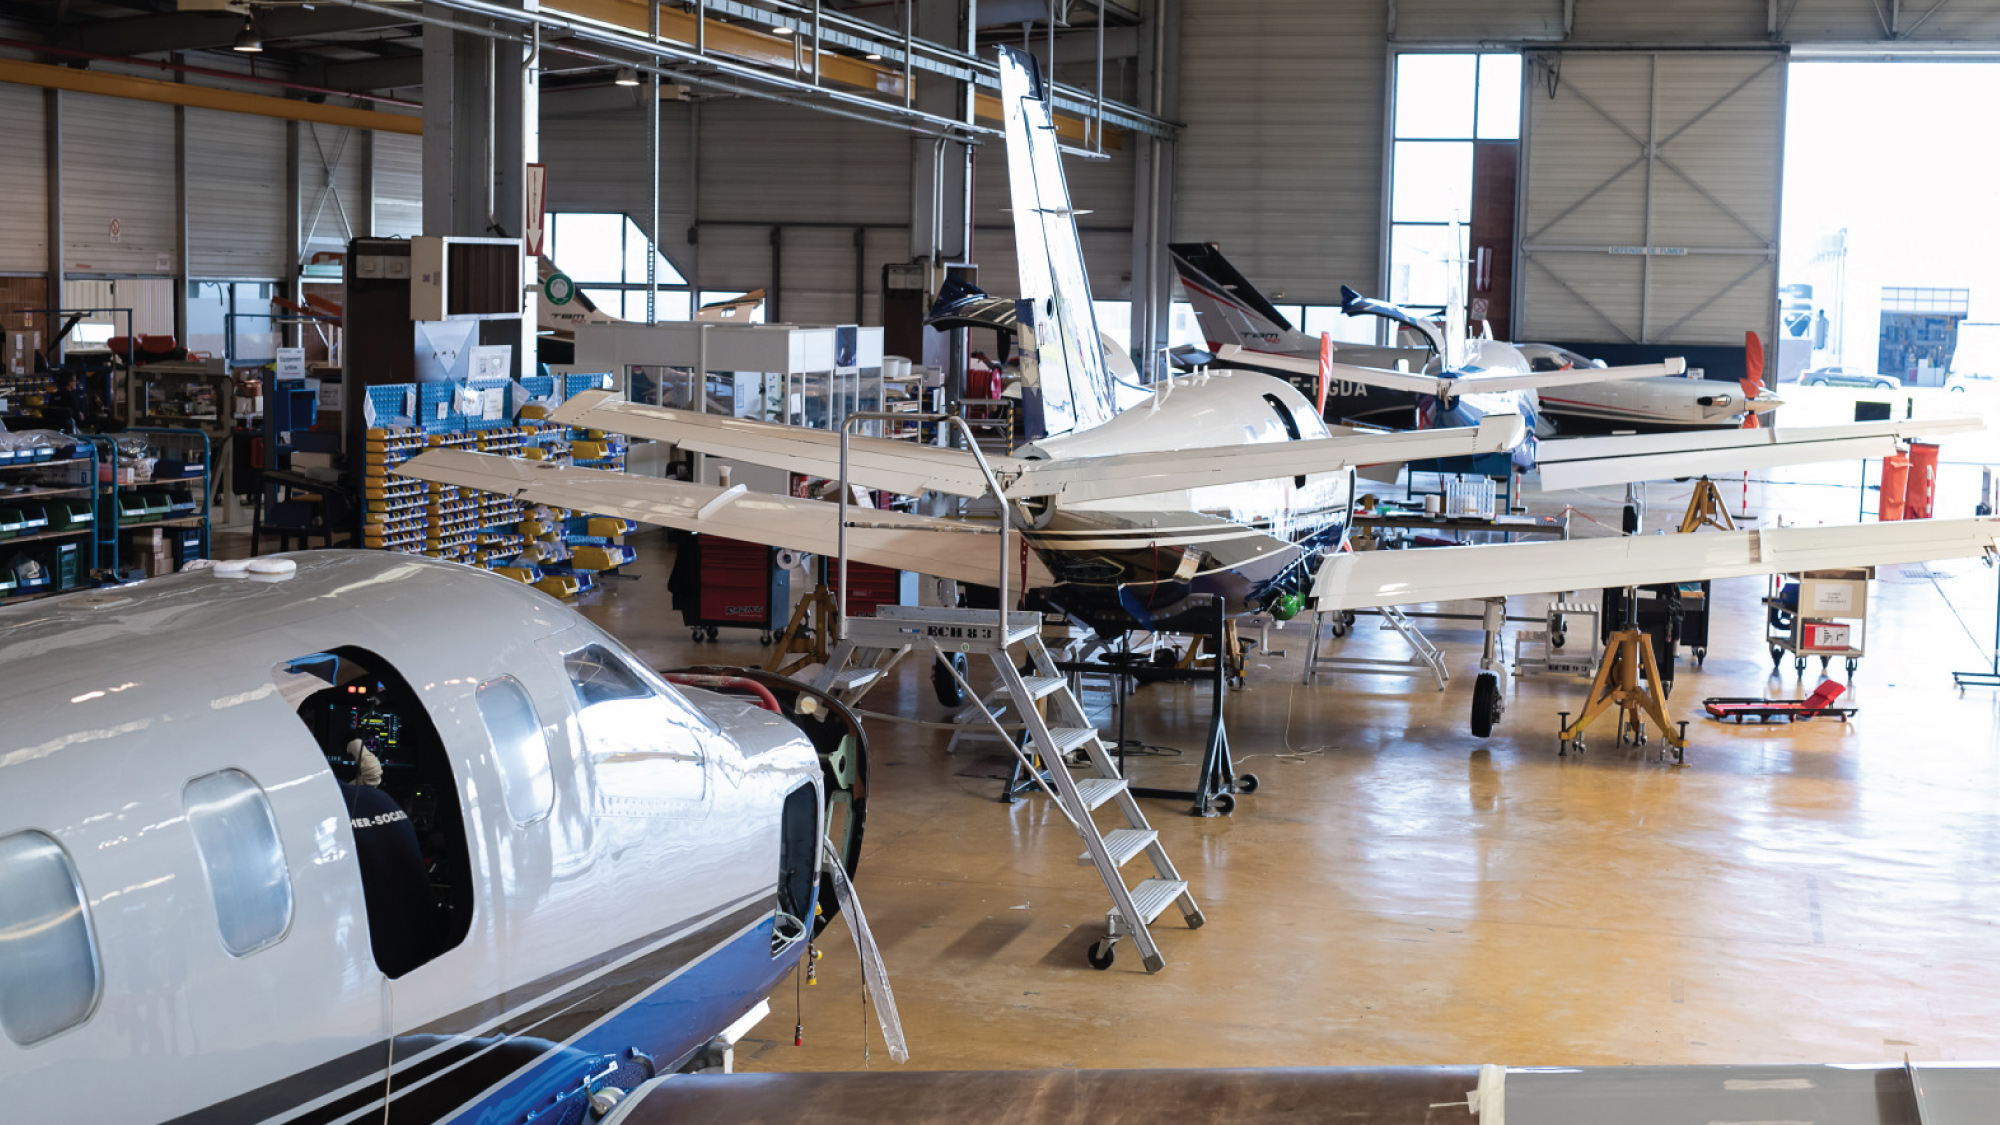 A view of the Daher factory complex in Tarbes, France, where aircraft manufacturing takes place. Tailored for self-flying pilots planning an european adventure